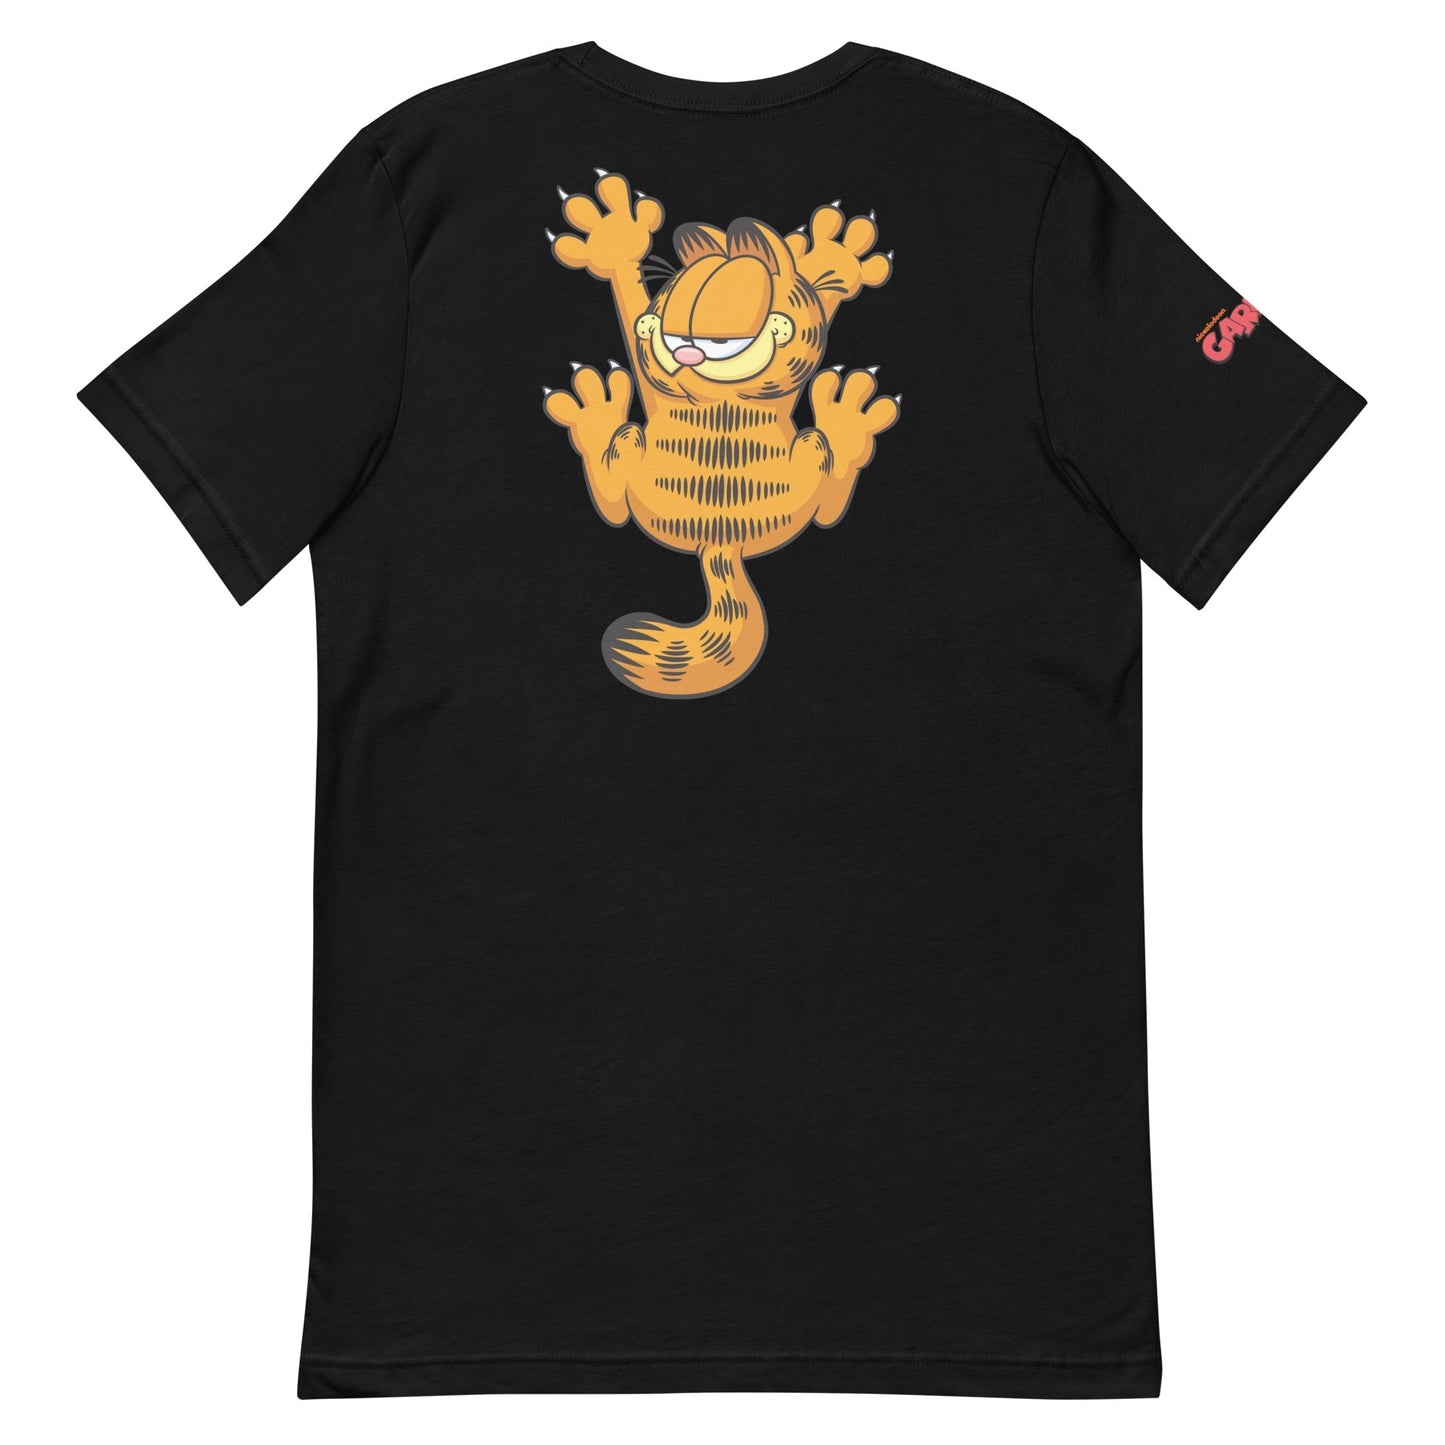 Garfield One Of Those Days Adult Short Sleeve T - Shirt - Paramount Shop